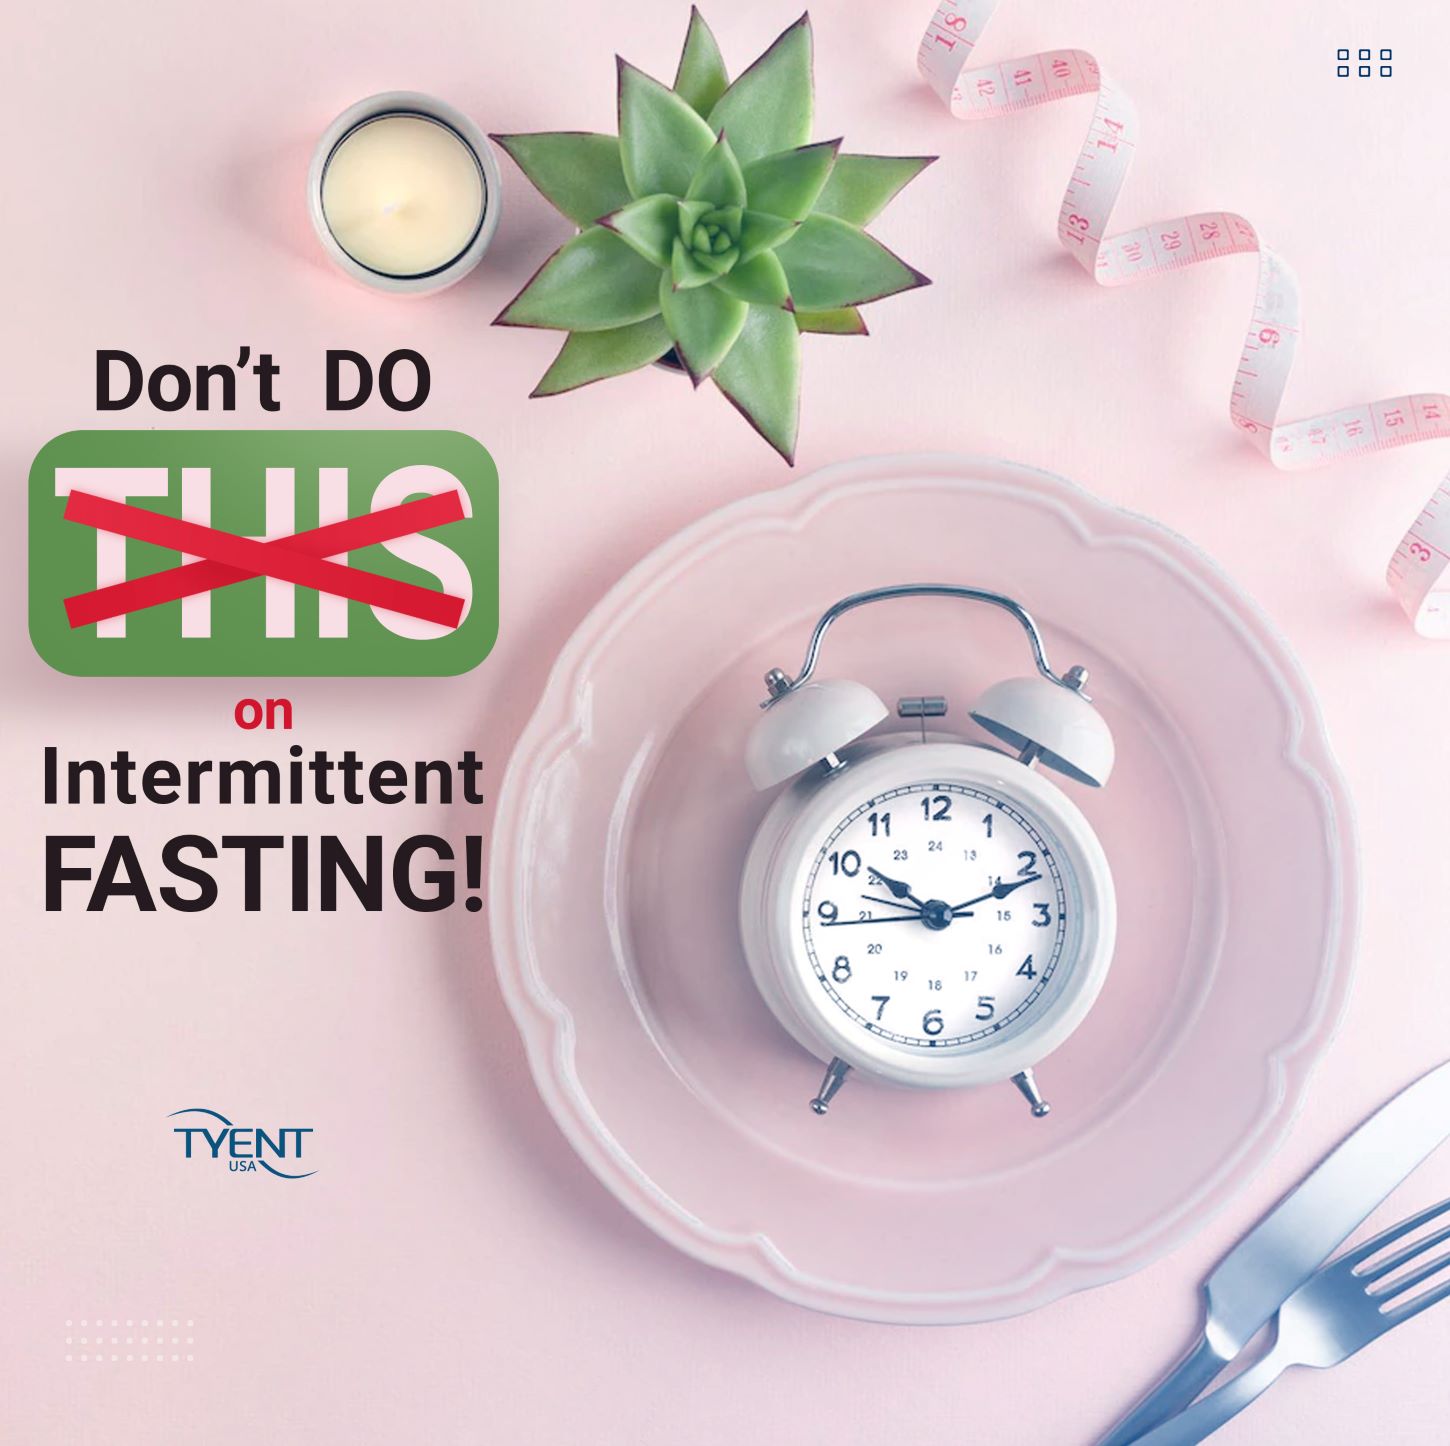 DON'T Do This on Intermittent Fasting!